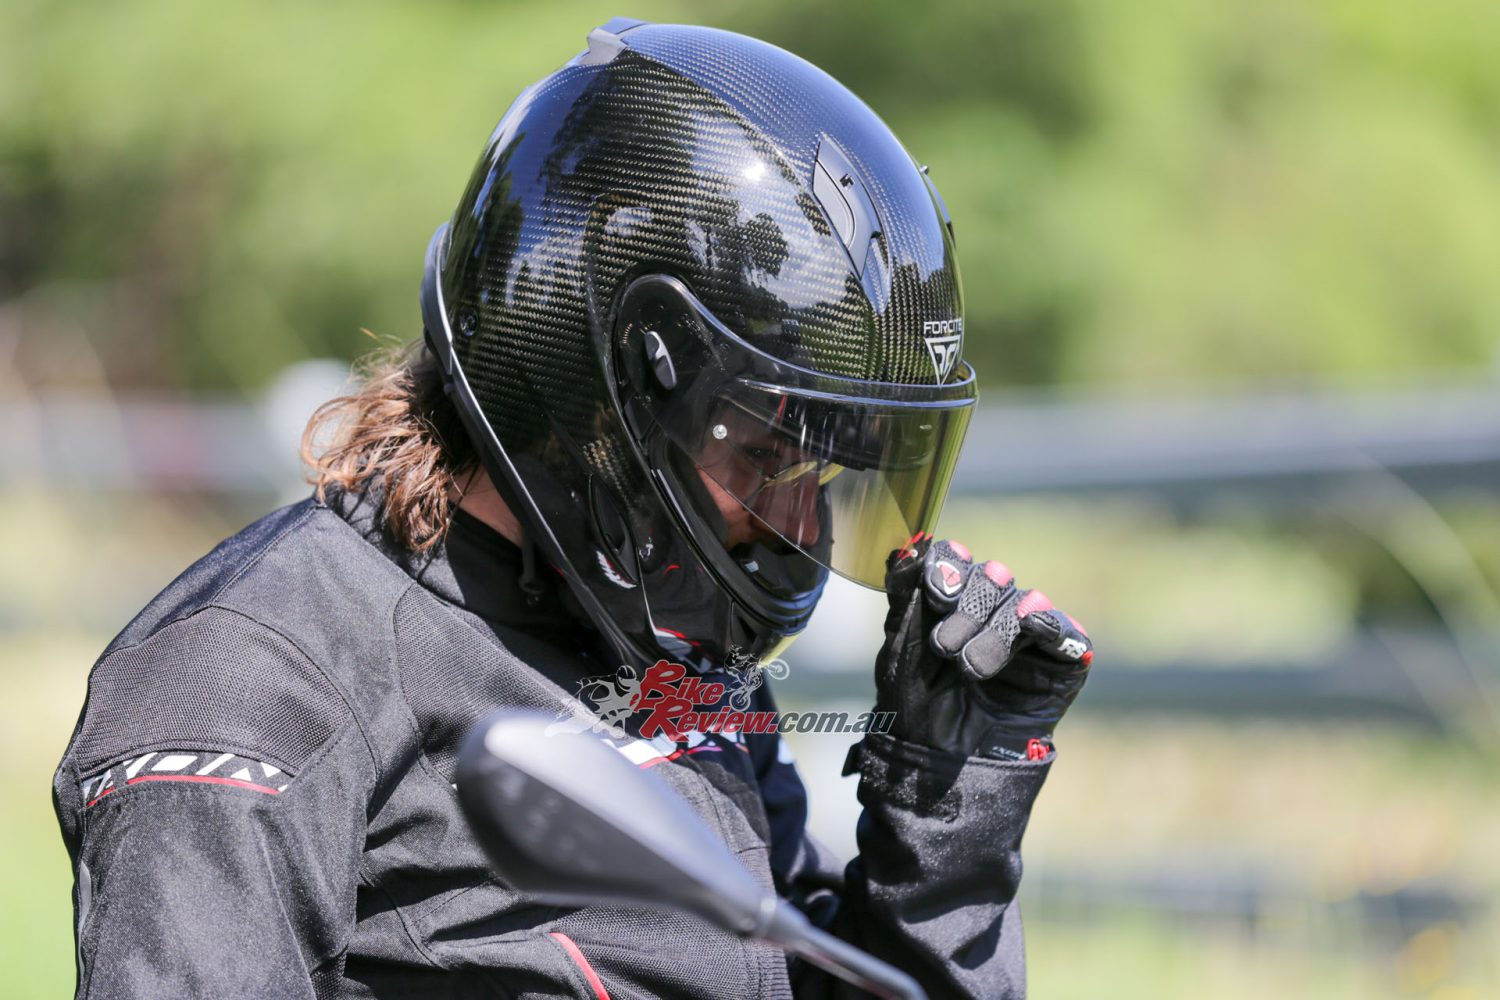 What an interesting lid, it’s a sign of the times when you have an intercom and camera built into your helmet.